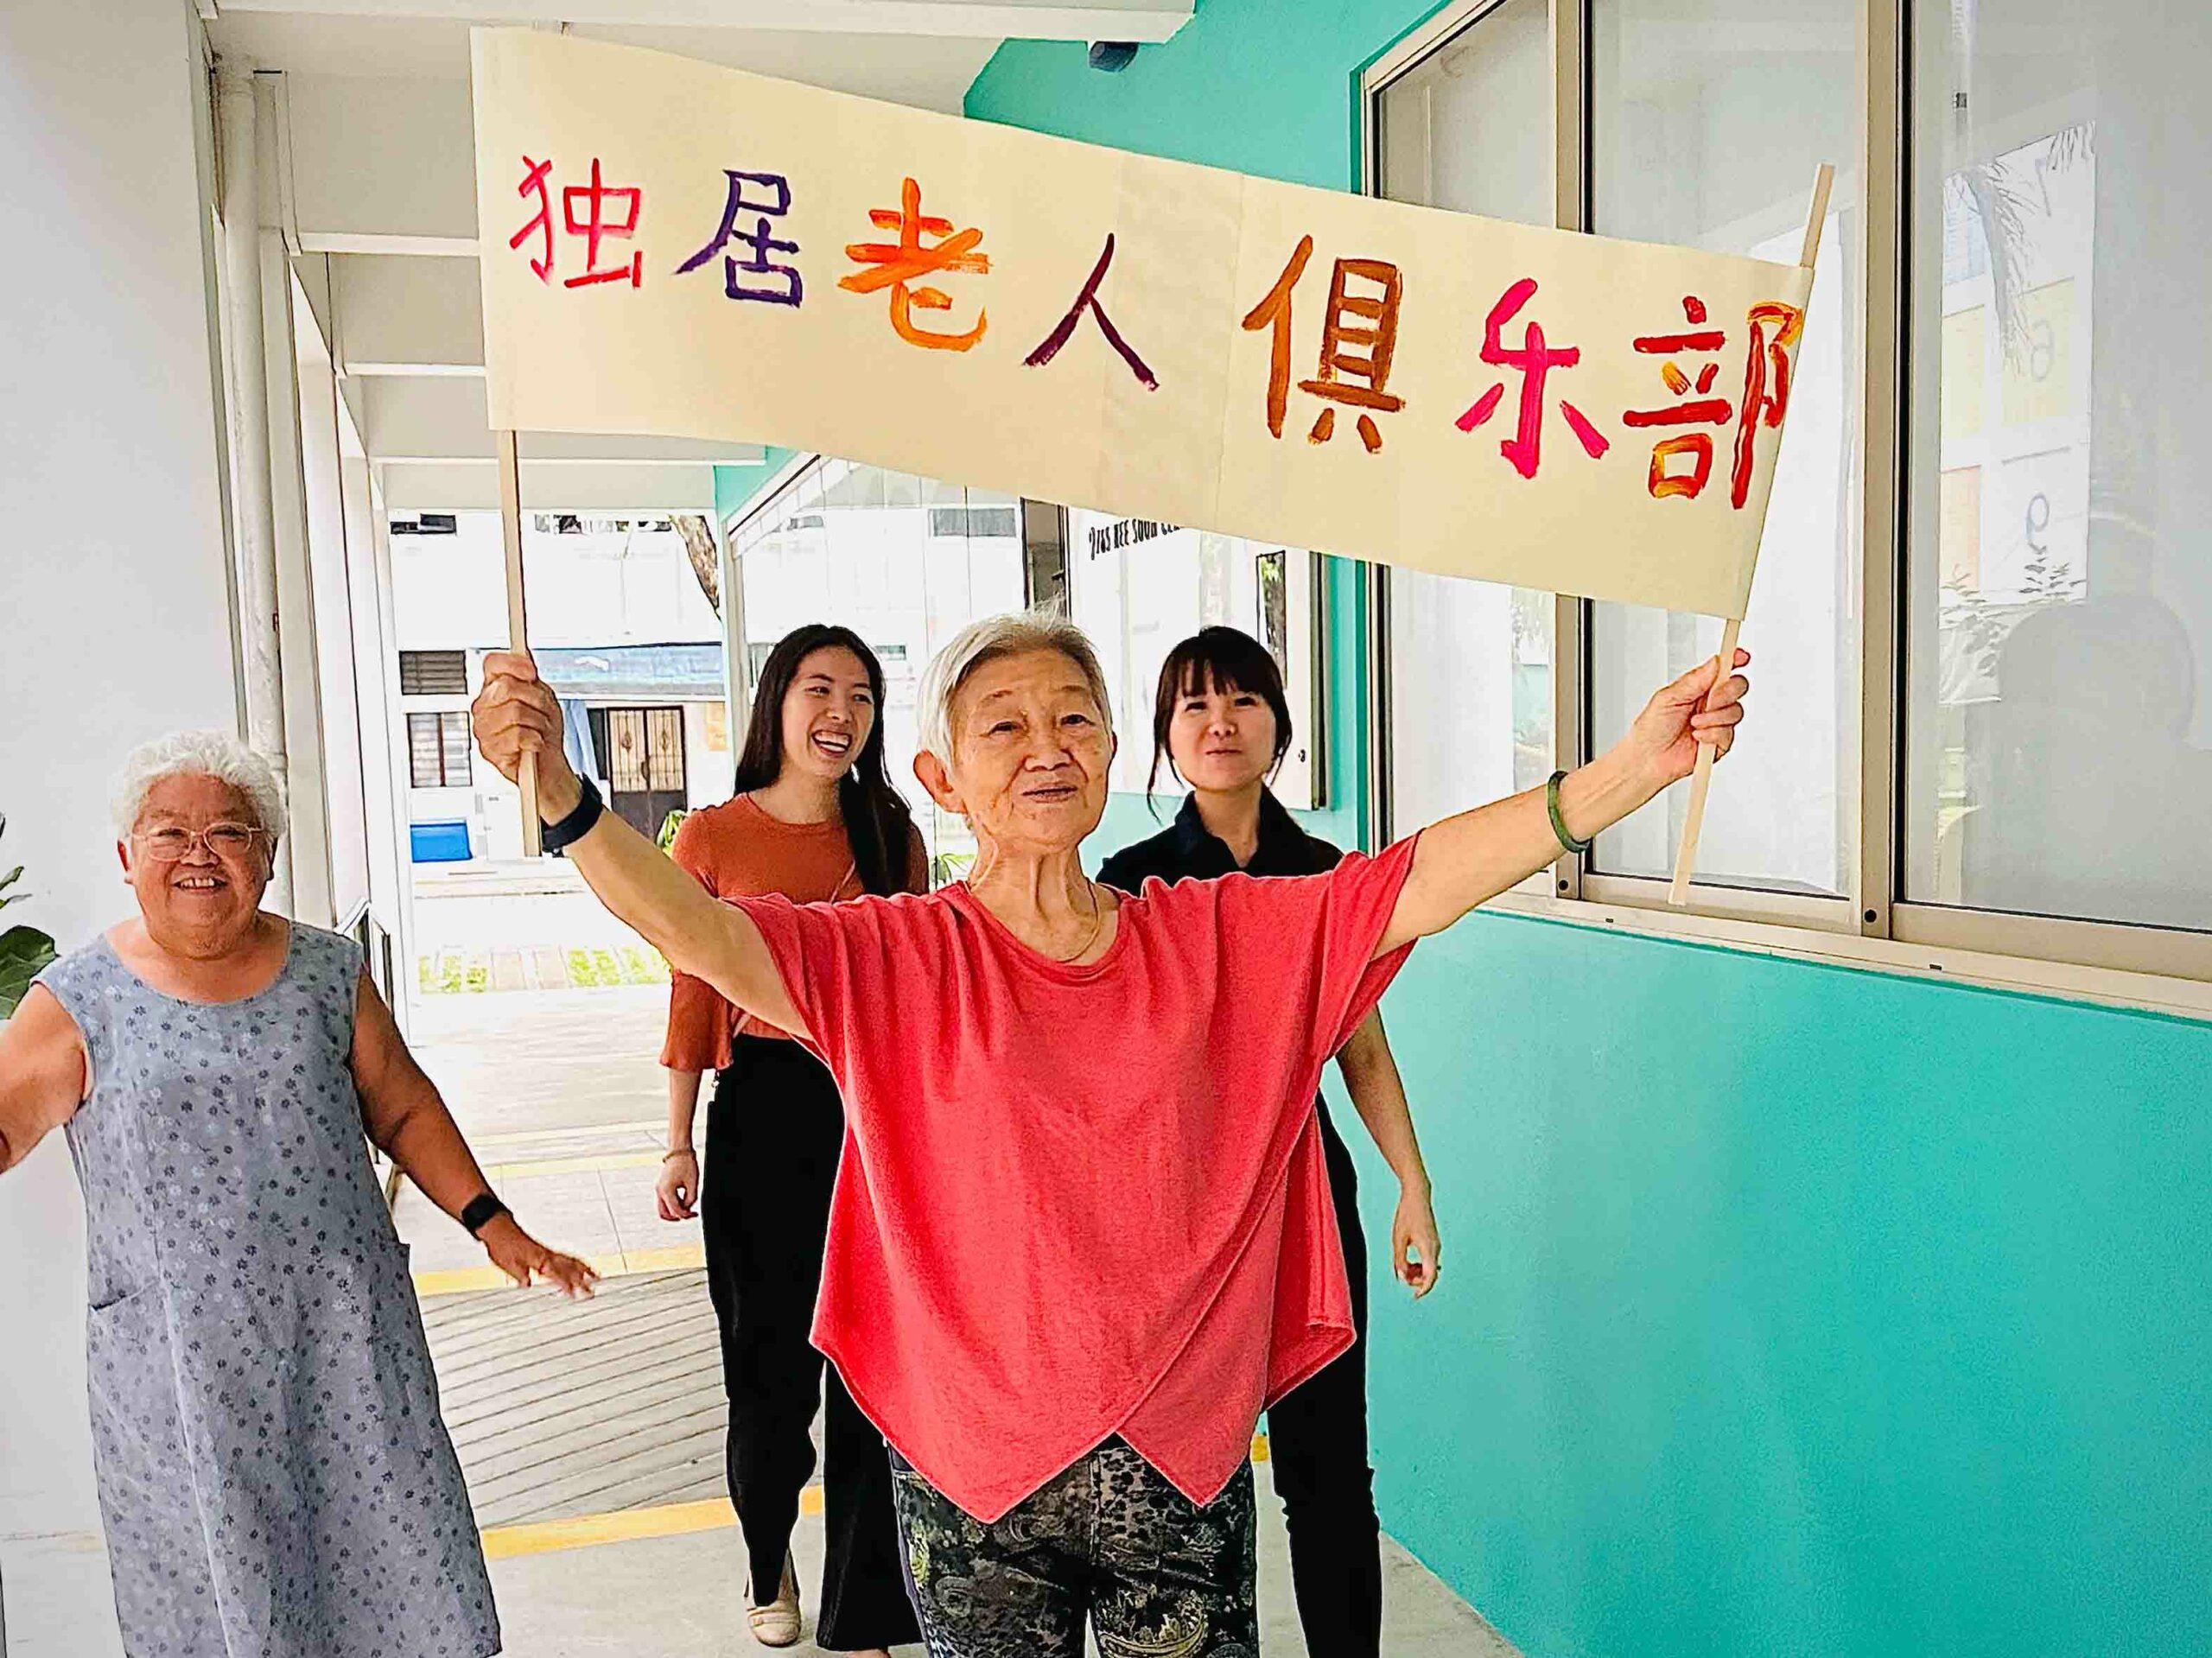 Tong Cheng holding up a banner with text in Chinese: Single Seniors’ Club as Yim Fong and 2 people follow behind. 